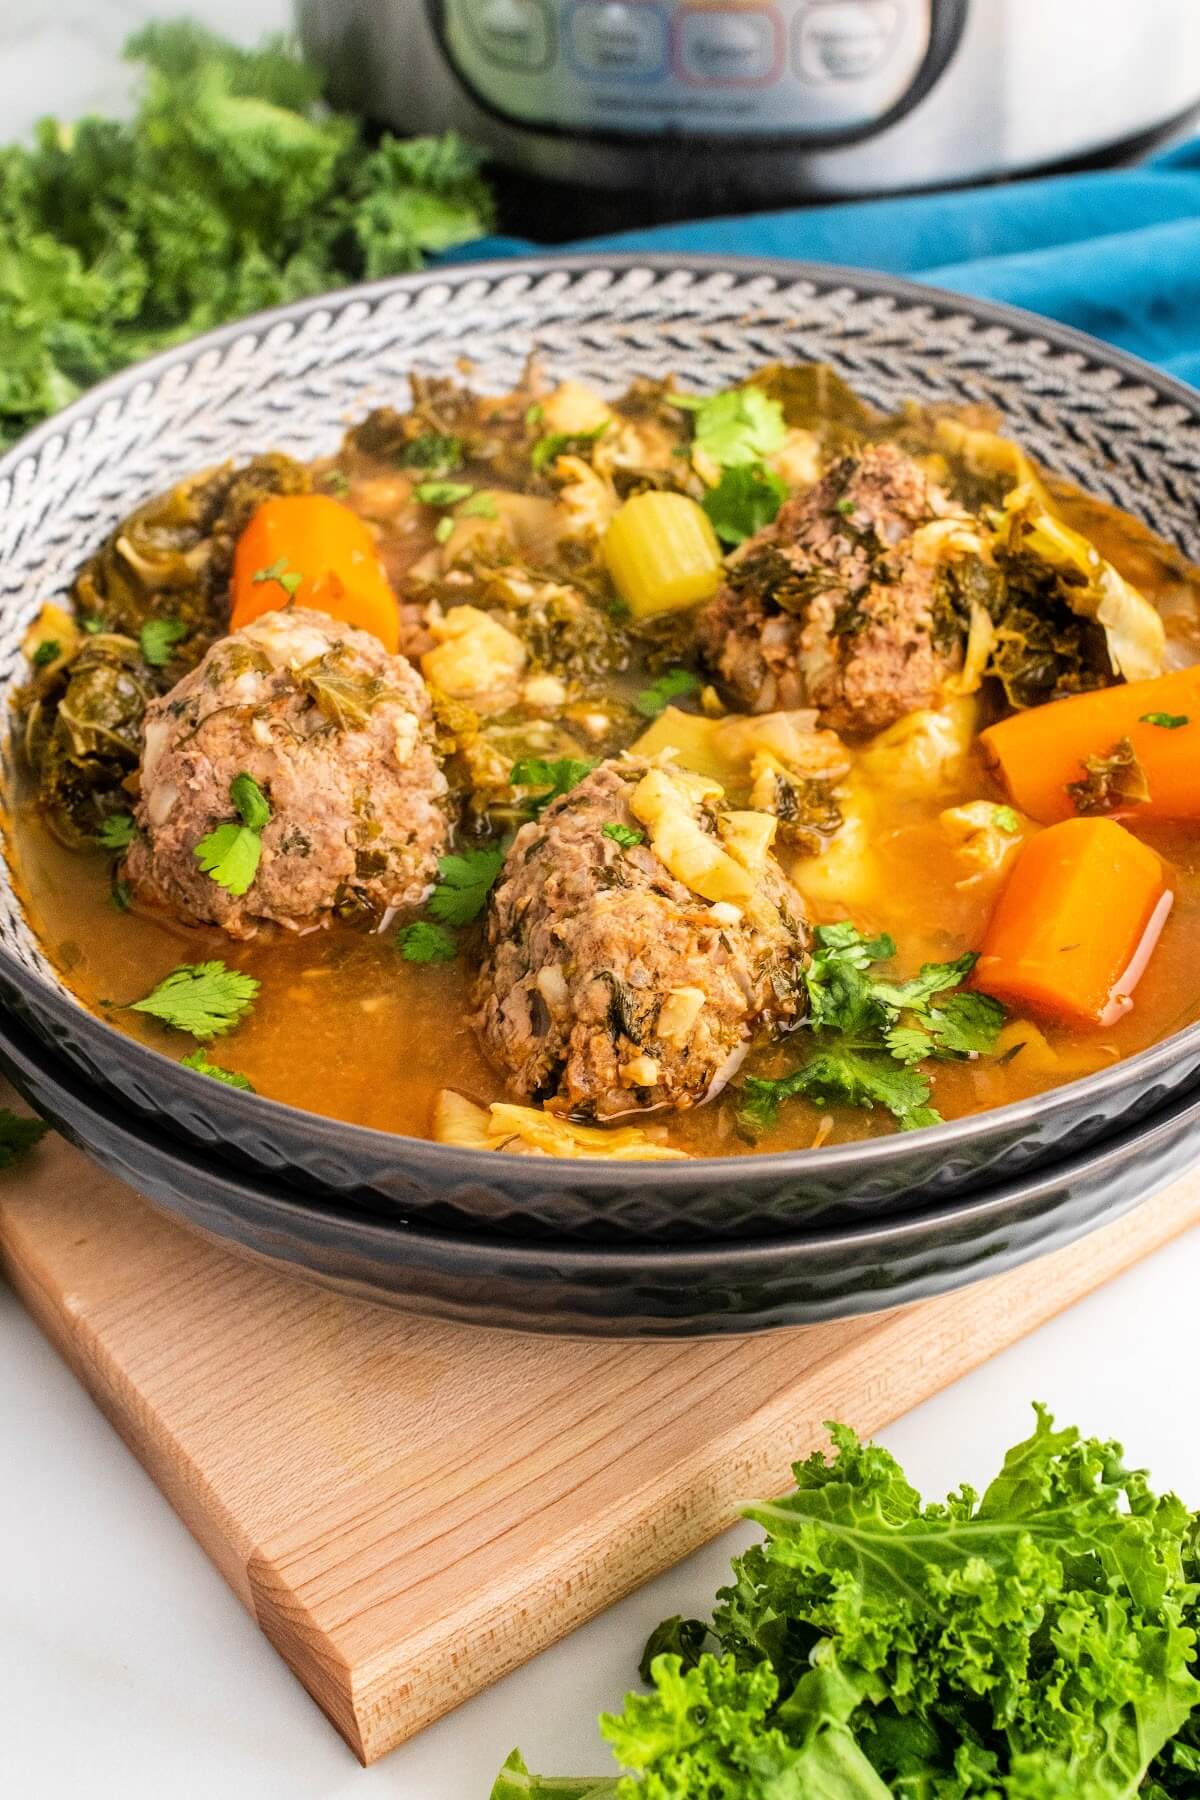 Bowl of meatball soup with 3 meatballs, chunks of carrots, vegetables and fresh herbs, sitting on a wood cutting board next to fresh cilantro, fresh kale and a blue cloth napkin and an Instant Pot in the background.